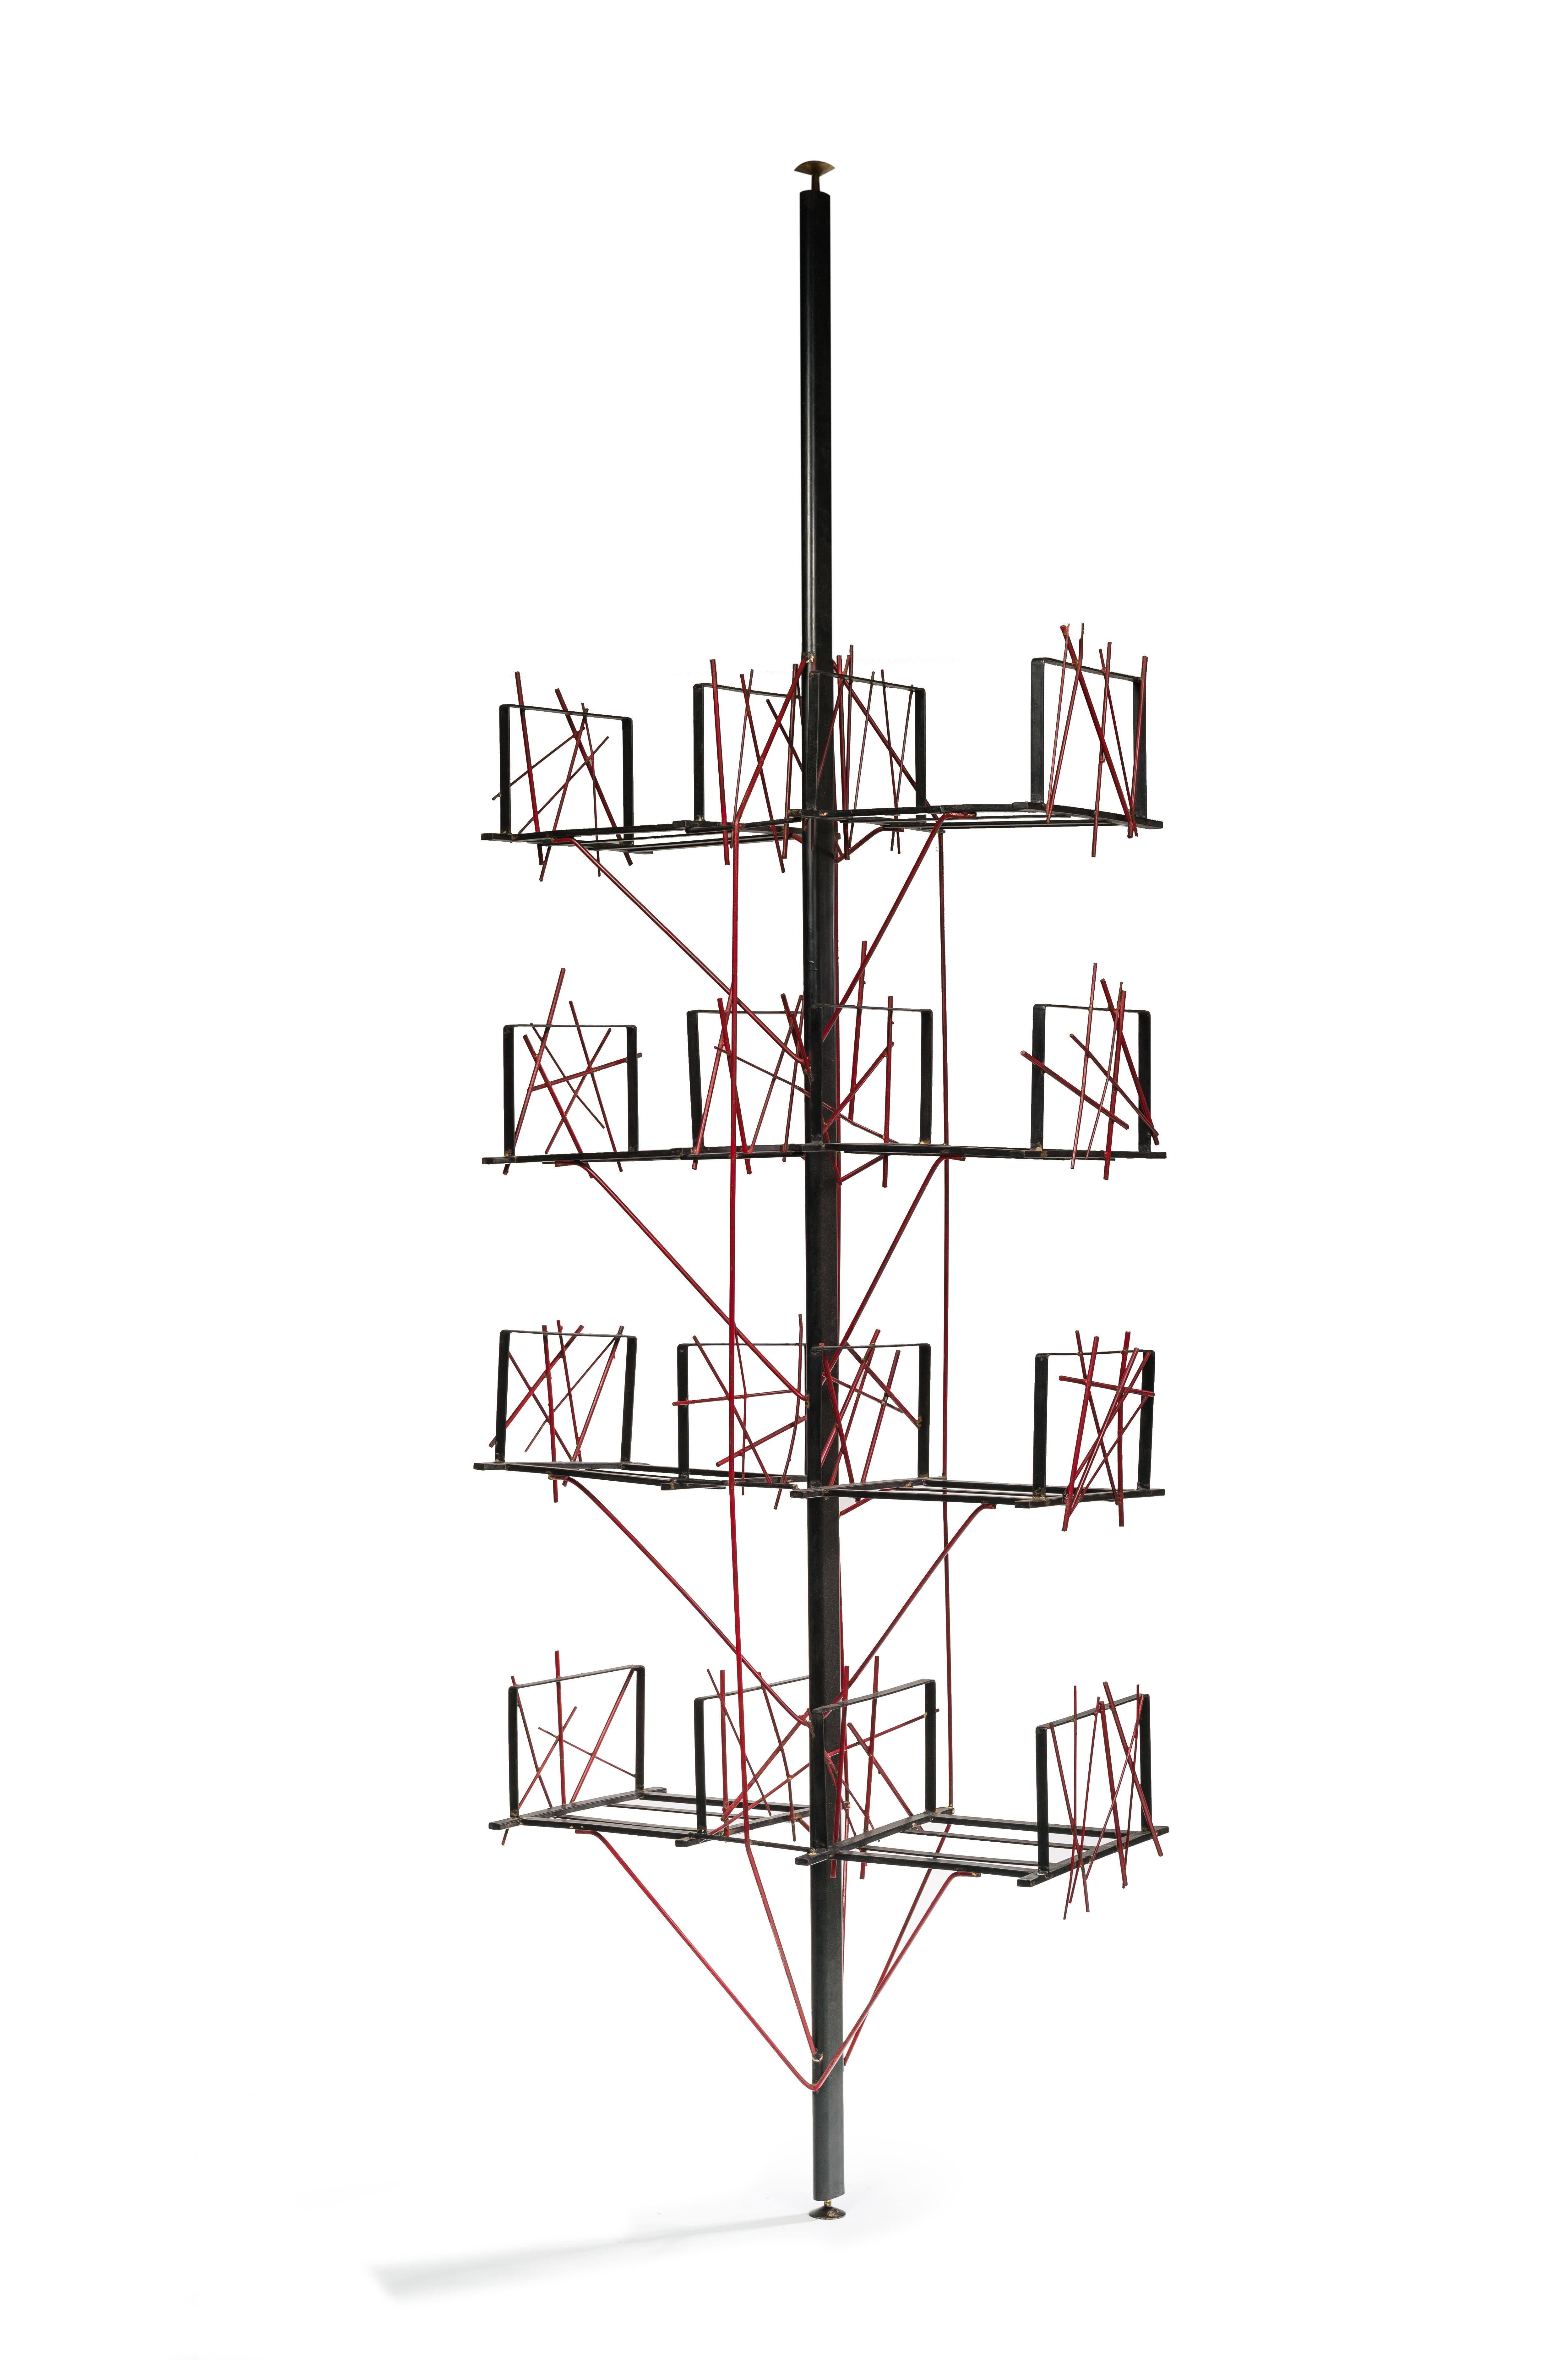 Cesare Lazzarini, 1931-2010
Shelf-sculpture, unique piece 1956.
Four double shelves in black painted welded flat bars hang on either side of the ovoid tube central pivot.
Short round irons painted in red are welded to the ends of the shelves,